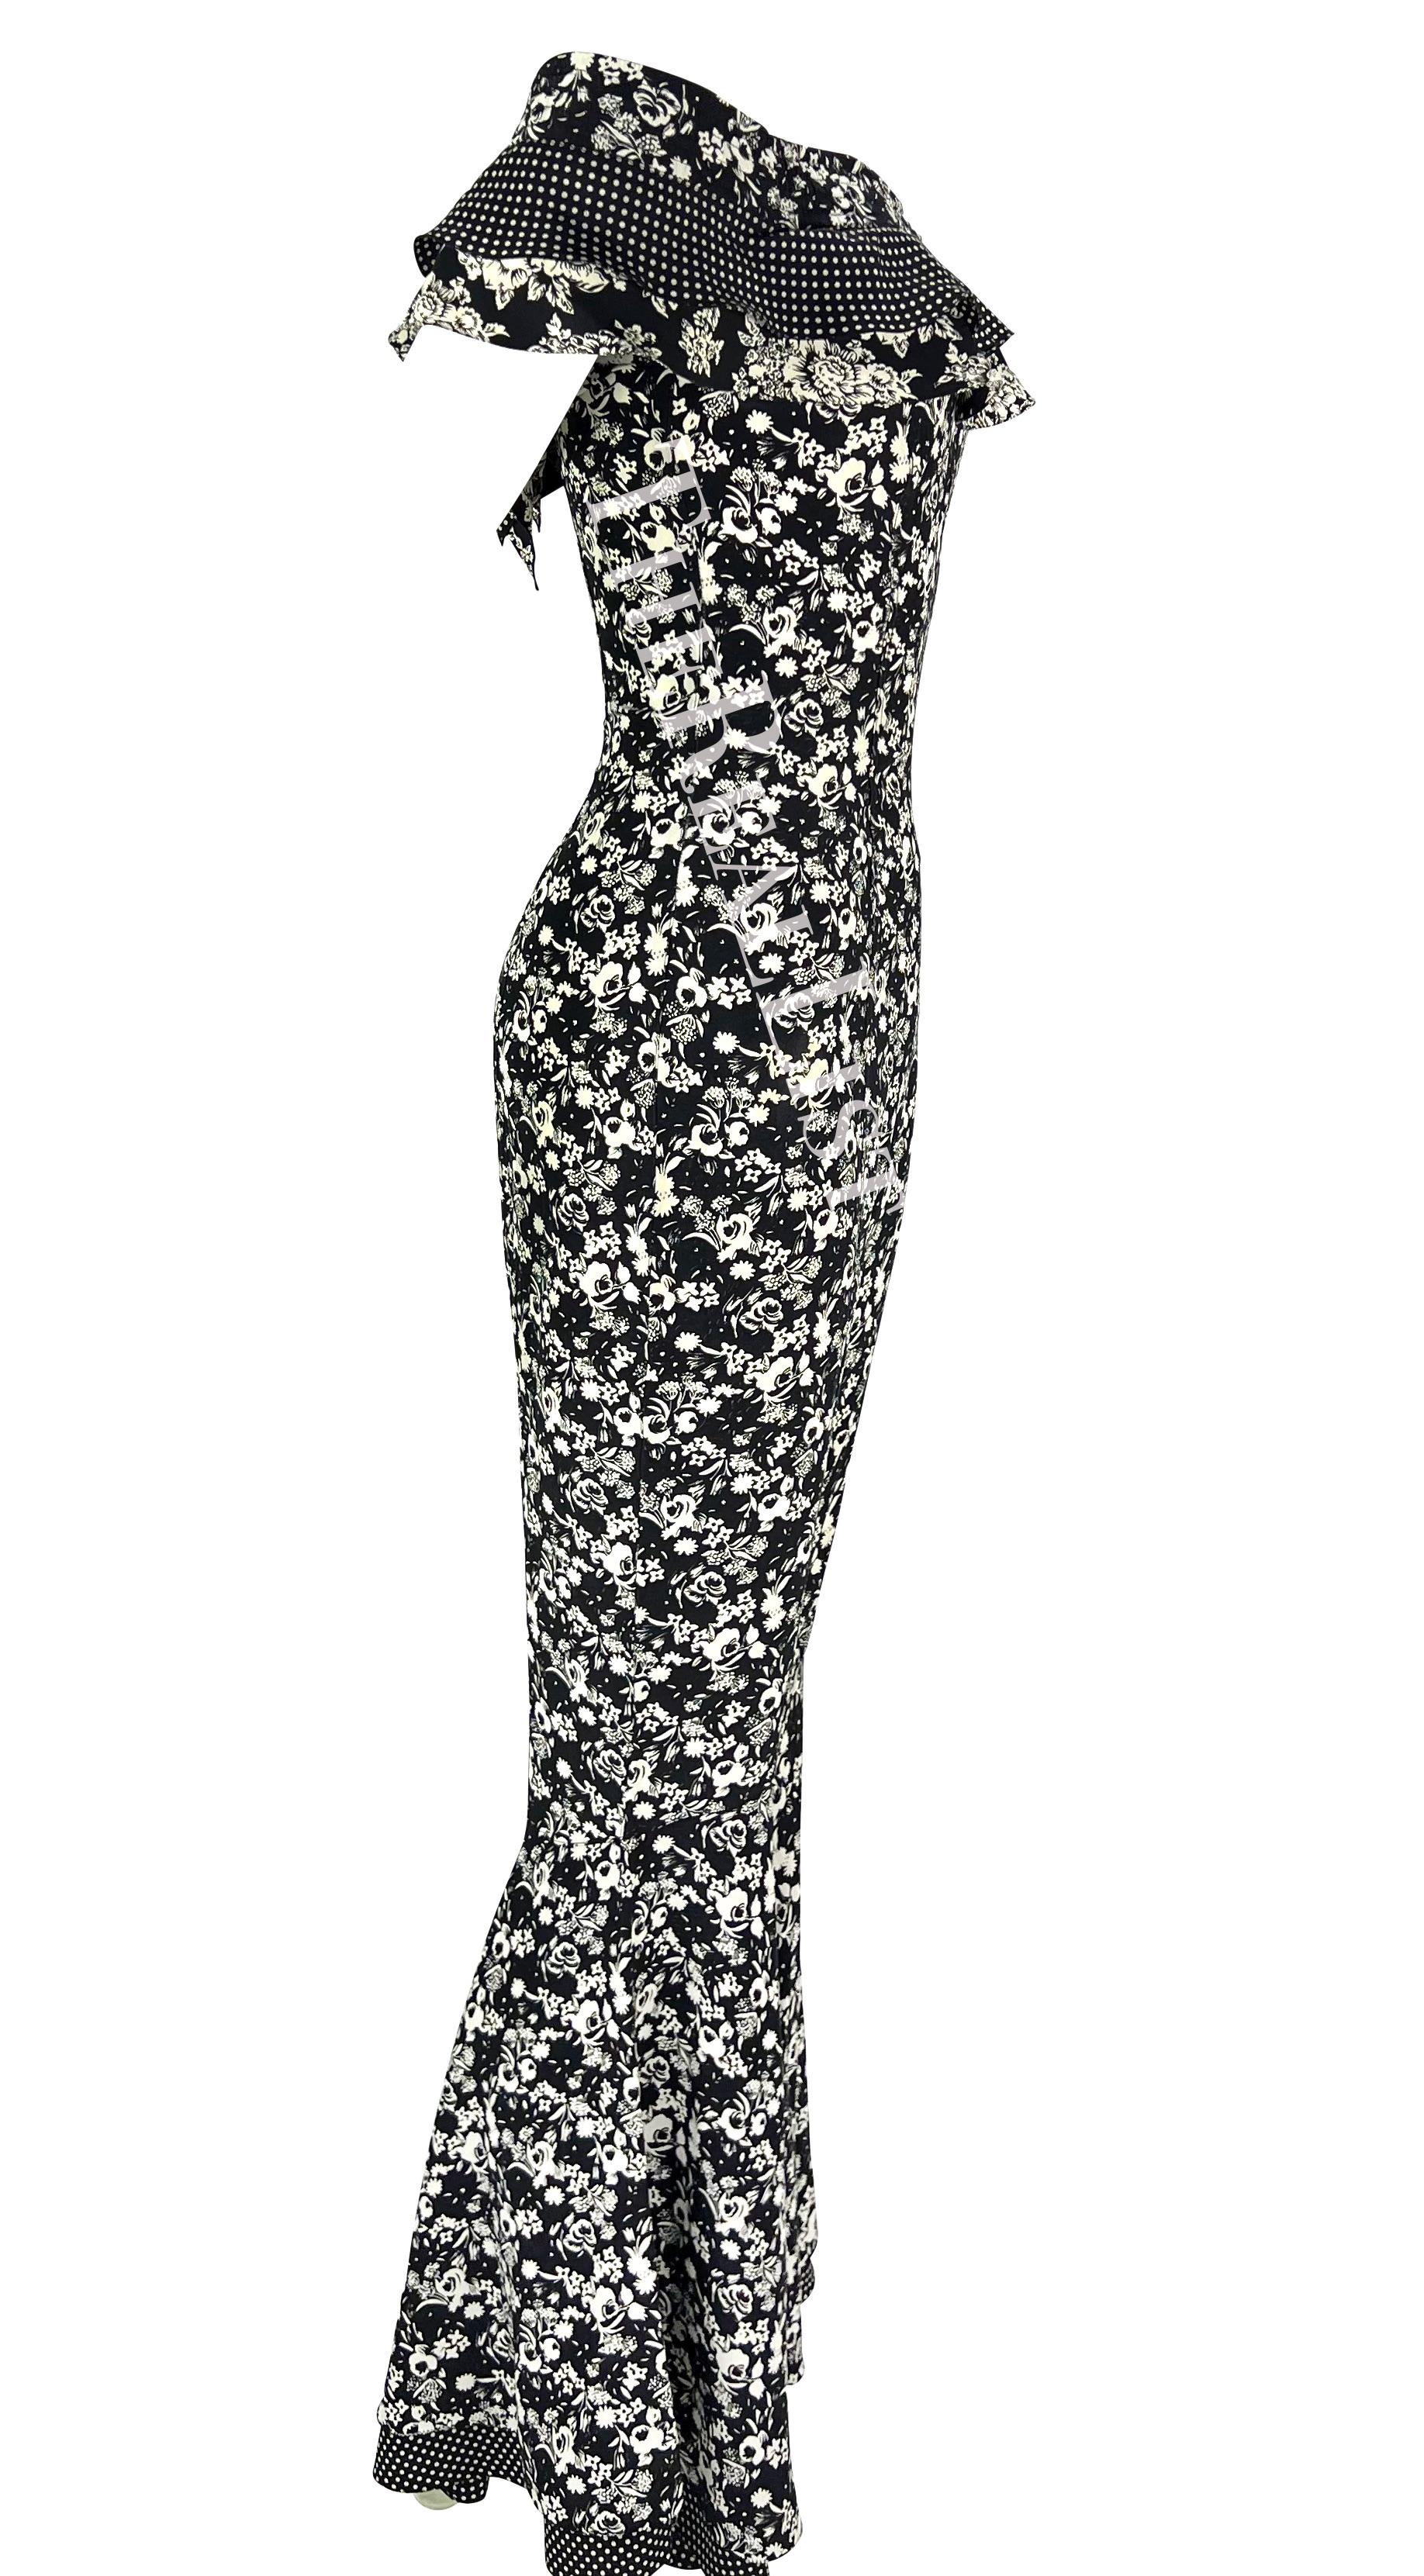 S/S 1993 Gianni Versace Black White Floral Flared Bell-Bottom Catsuit For Sale 2